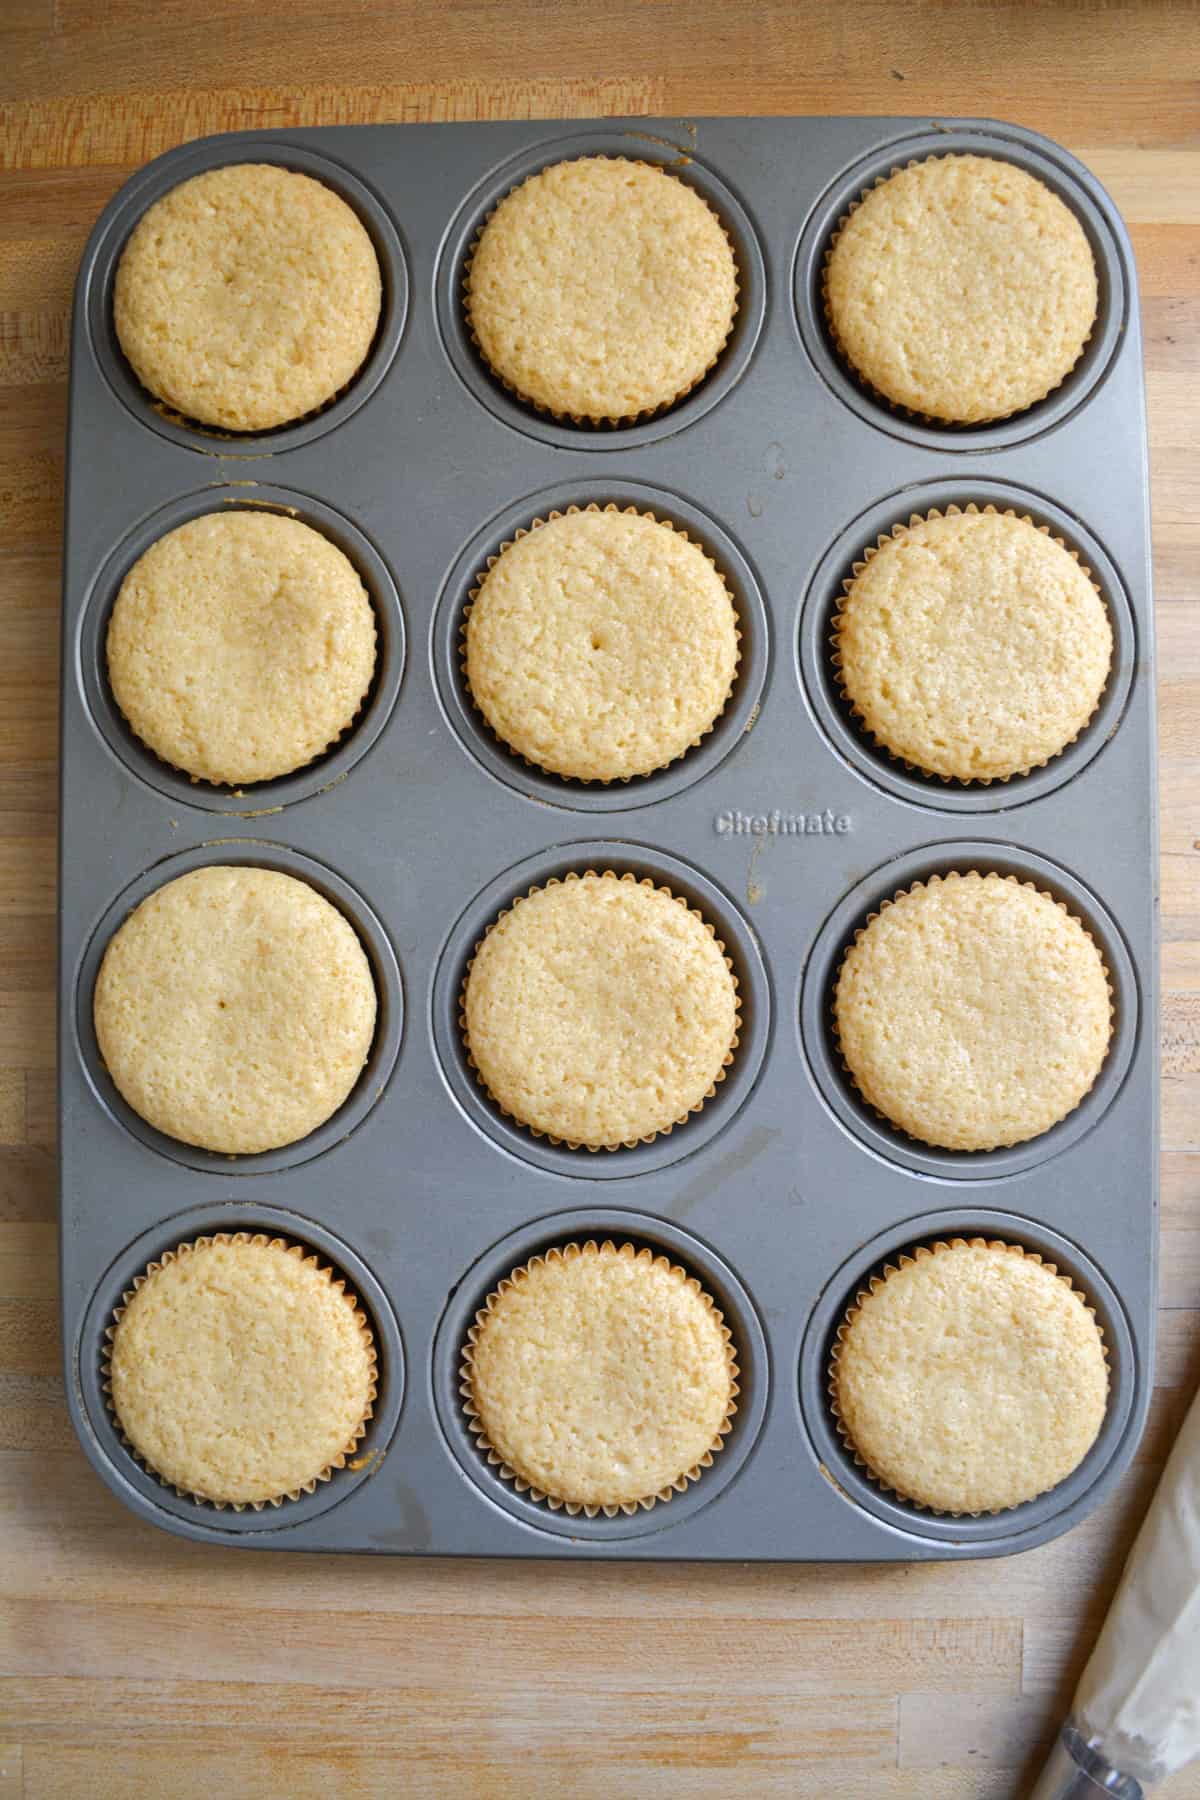 Baked lavender cupcakes in a cupcake pan.